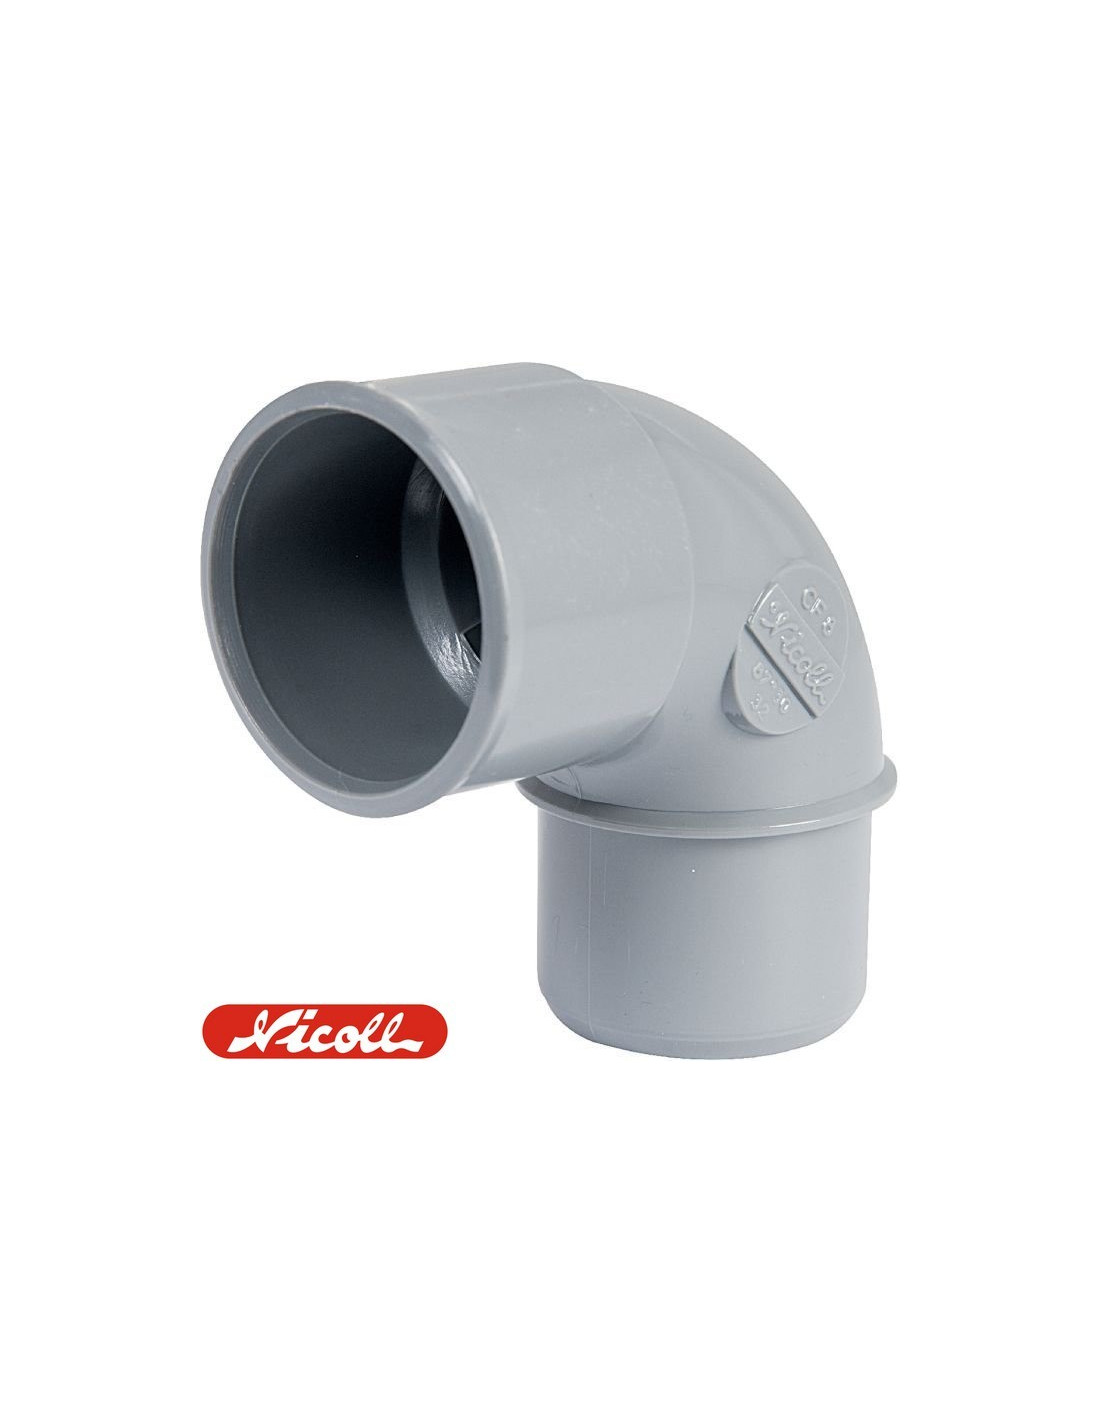 Coude 87 30 Male Femelle Pvc A Coller Nicoll O32 A 100 Plomberie Online Fr